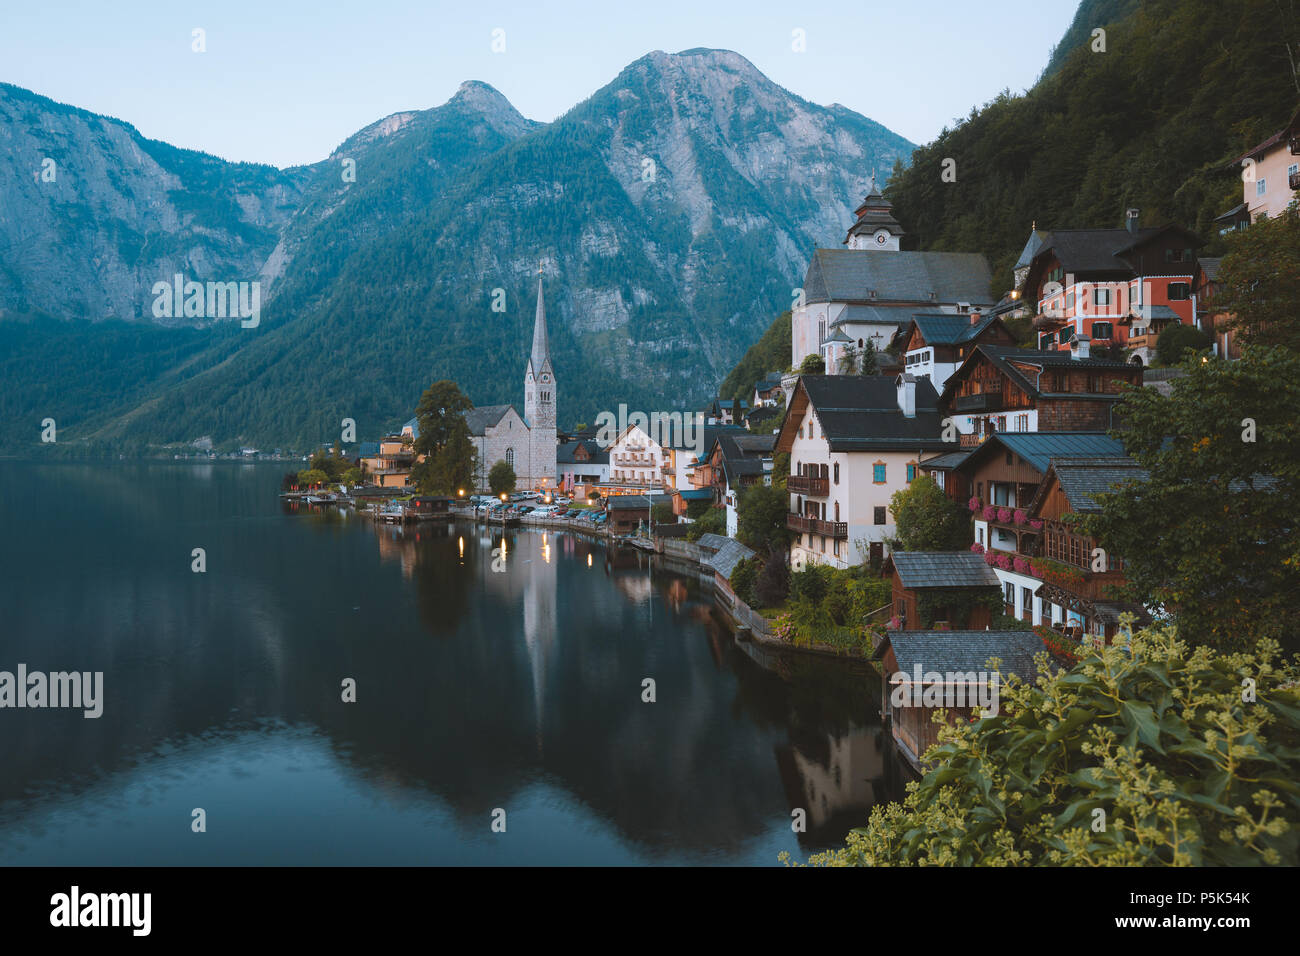 Classic postcard view of famous Hallstatt lakeside town in the Alps in early morning light at dawn with retro film look, Salzkammergut region, Austria Stock Photo